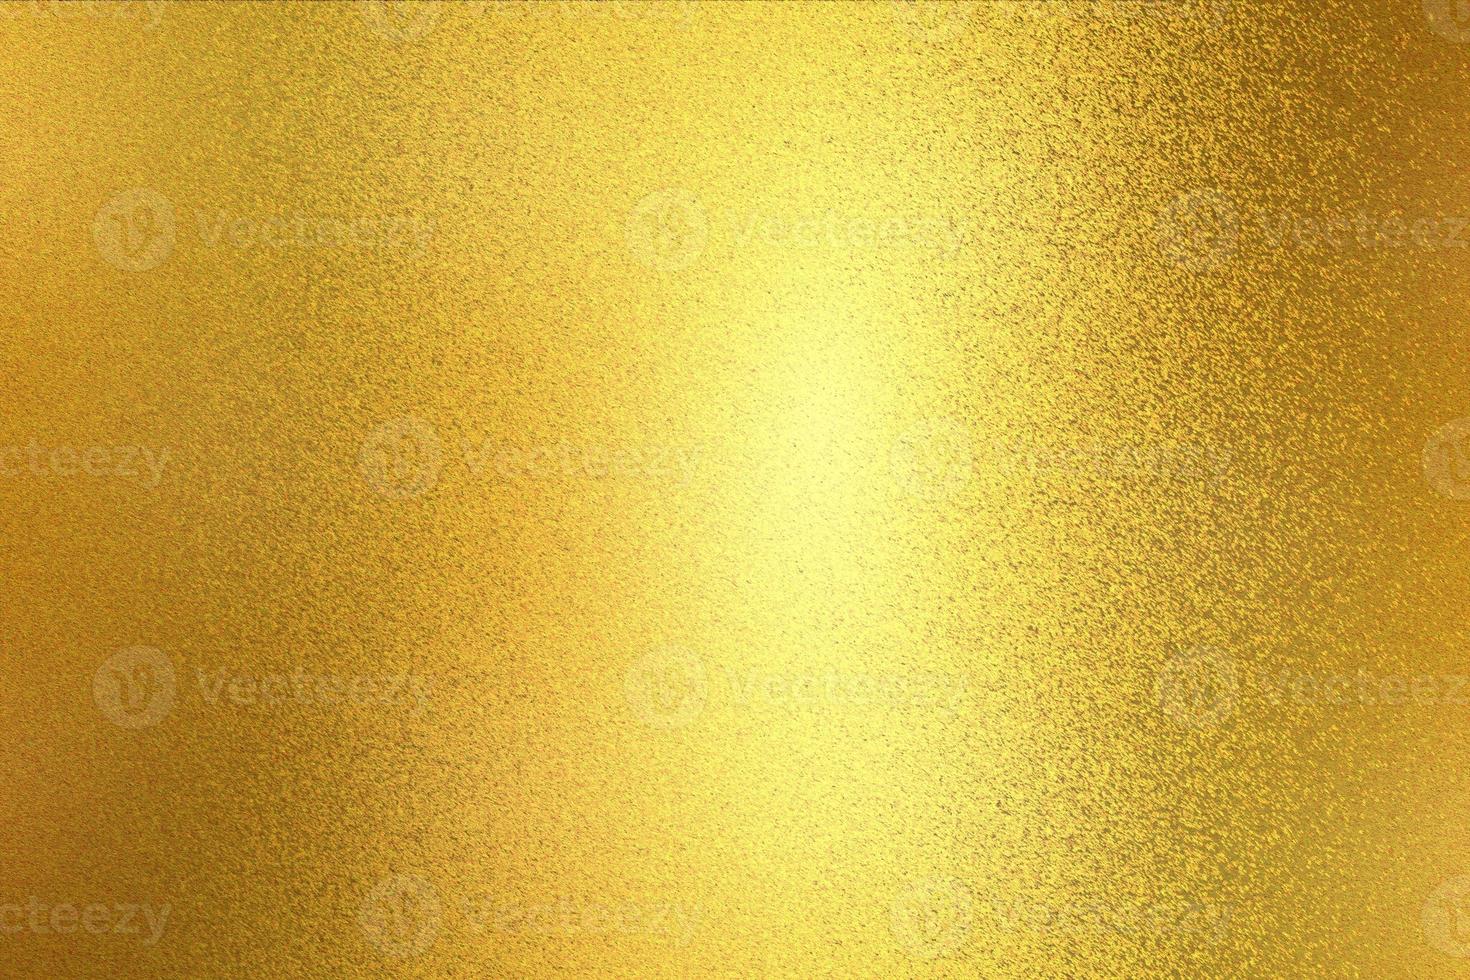 Glowing light gold paint steel wall texture, abstract pattern background photo